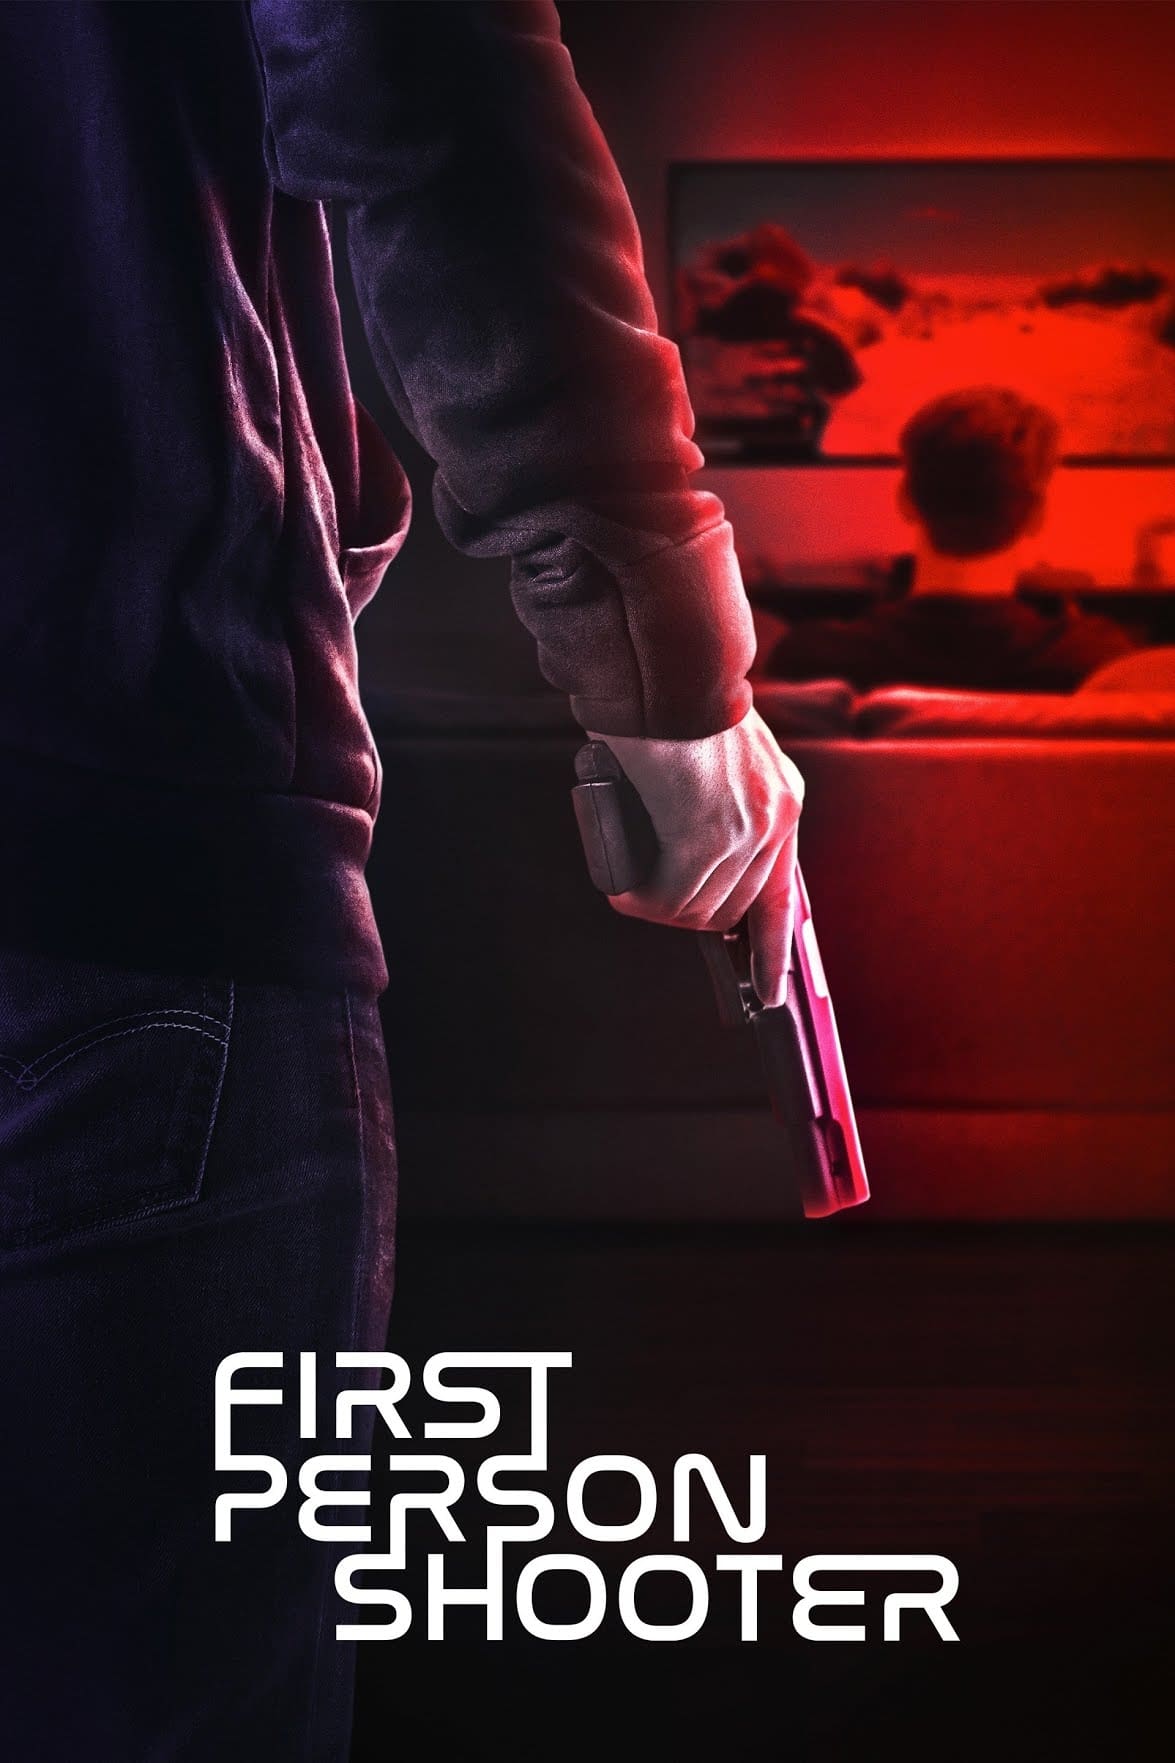 First Person Shooter film